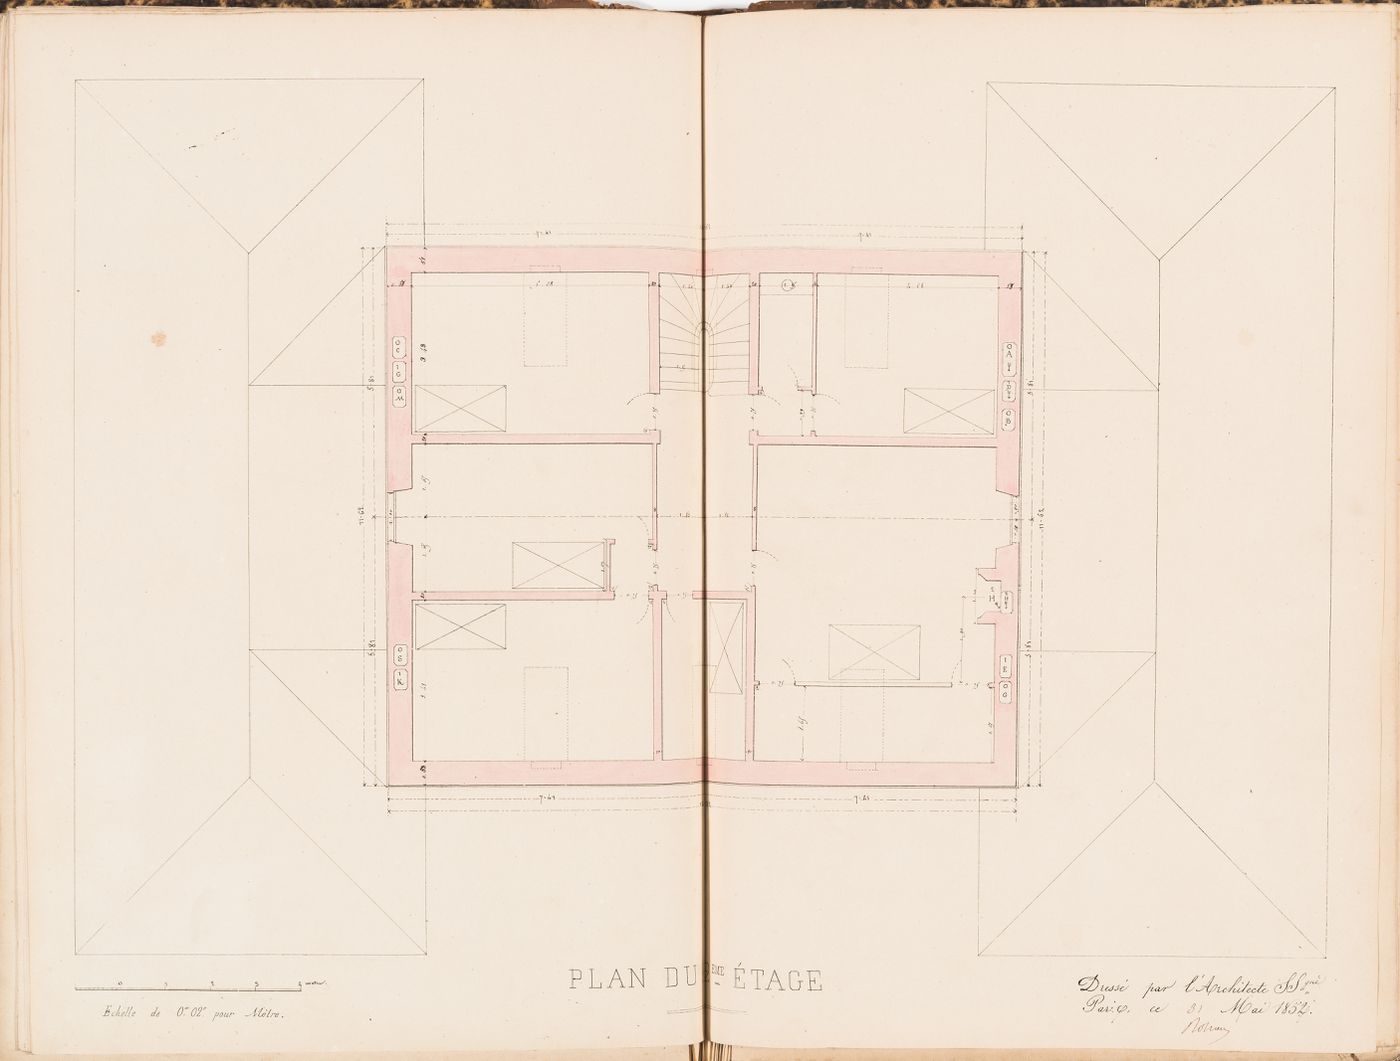 Second floor plan for a country house for Madame de Lescure, Royan